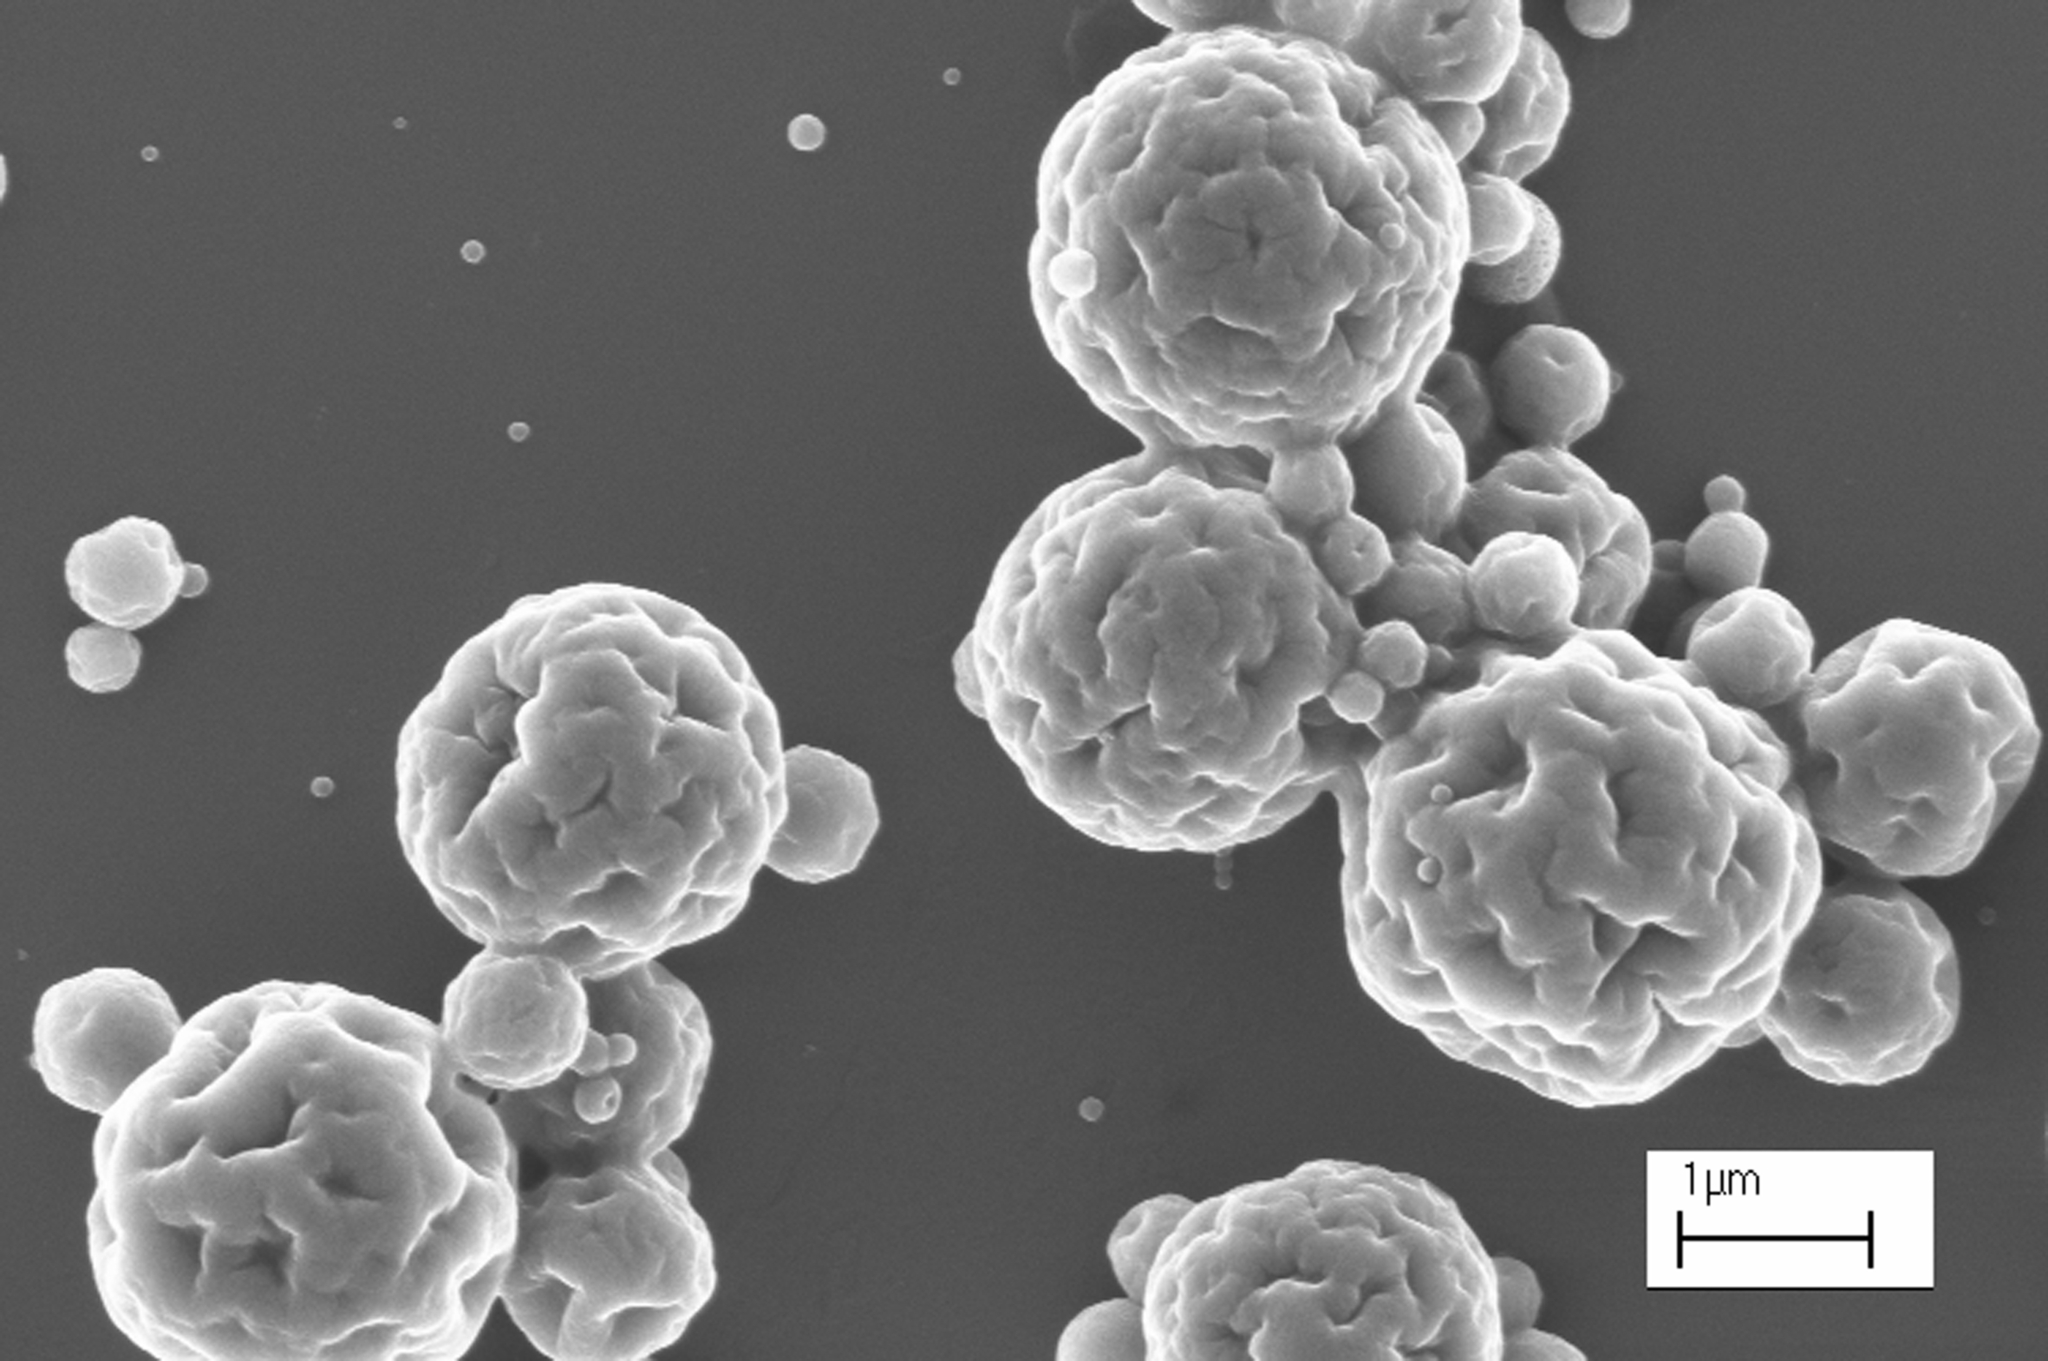 Black and white photo of the biopolymer particles.